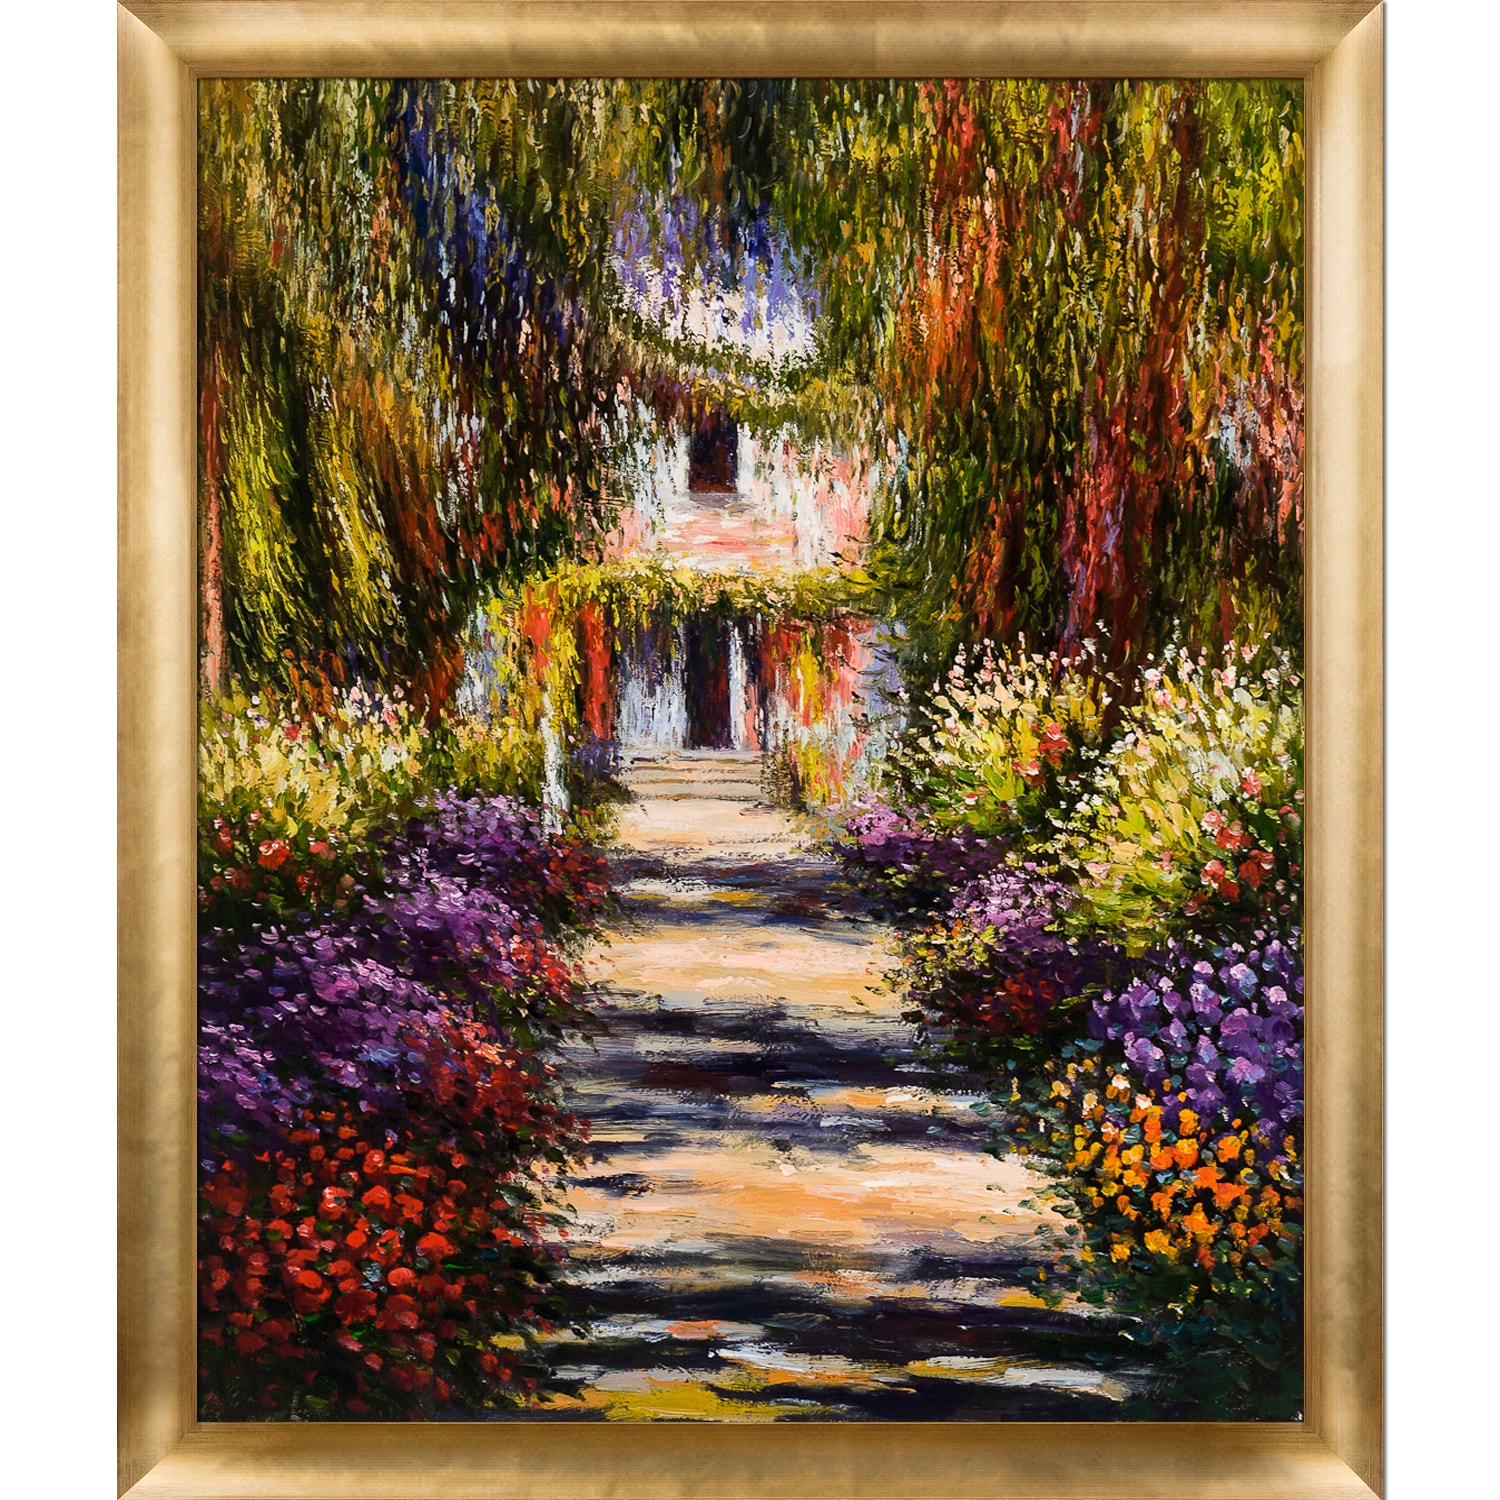 Giverny Claude Monet Framed, Monet Painting Garden Path At Giverny